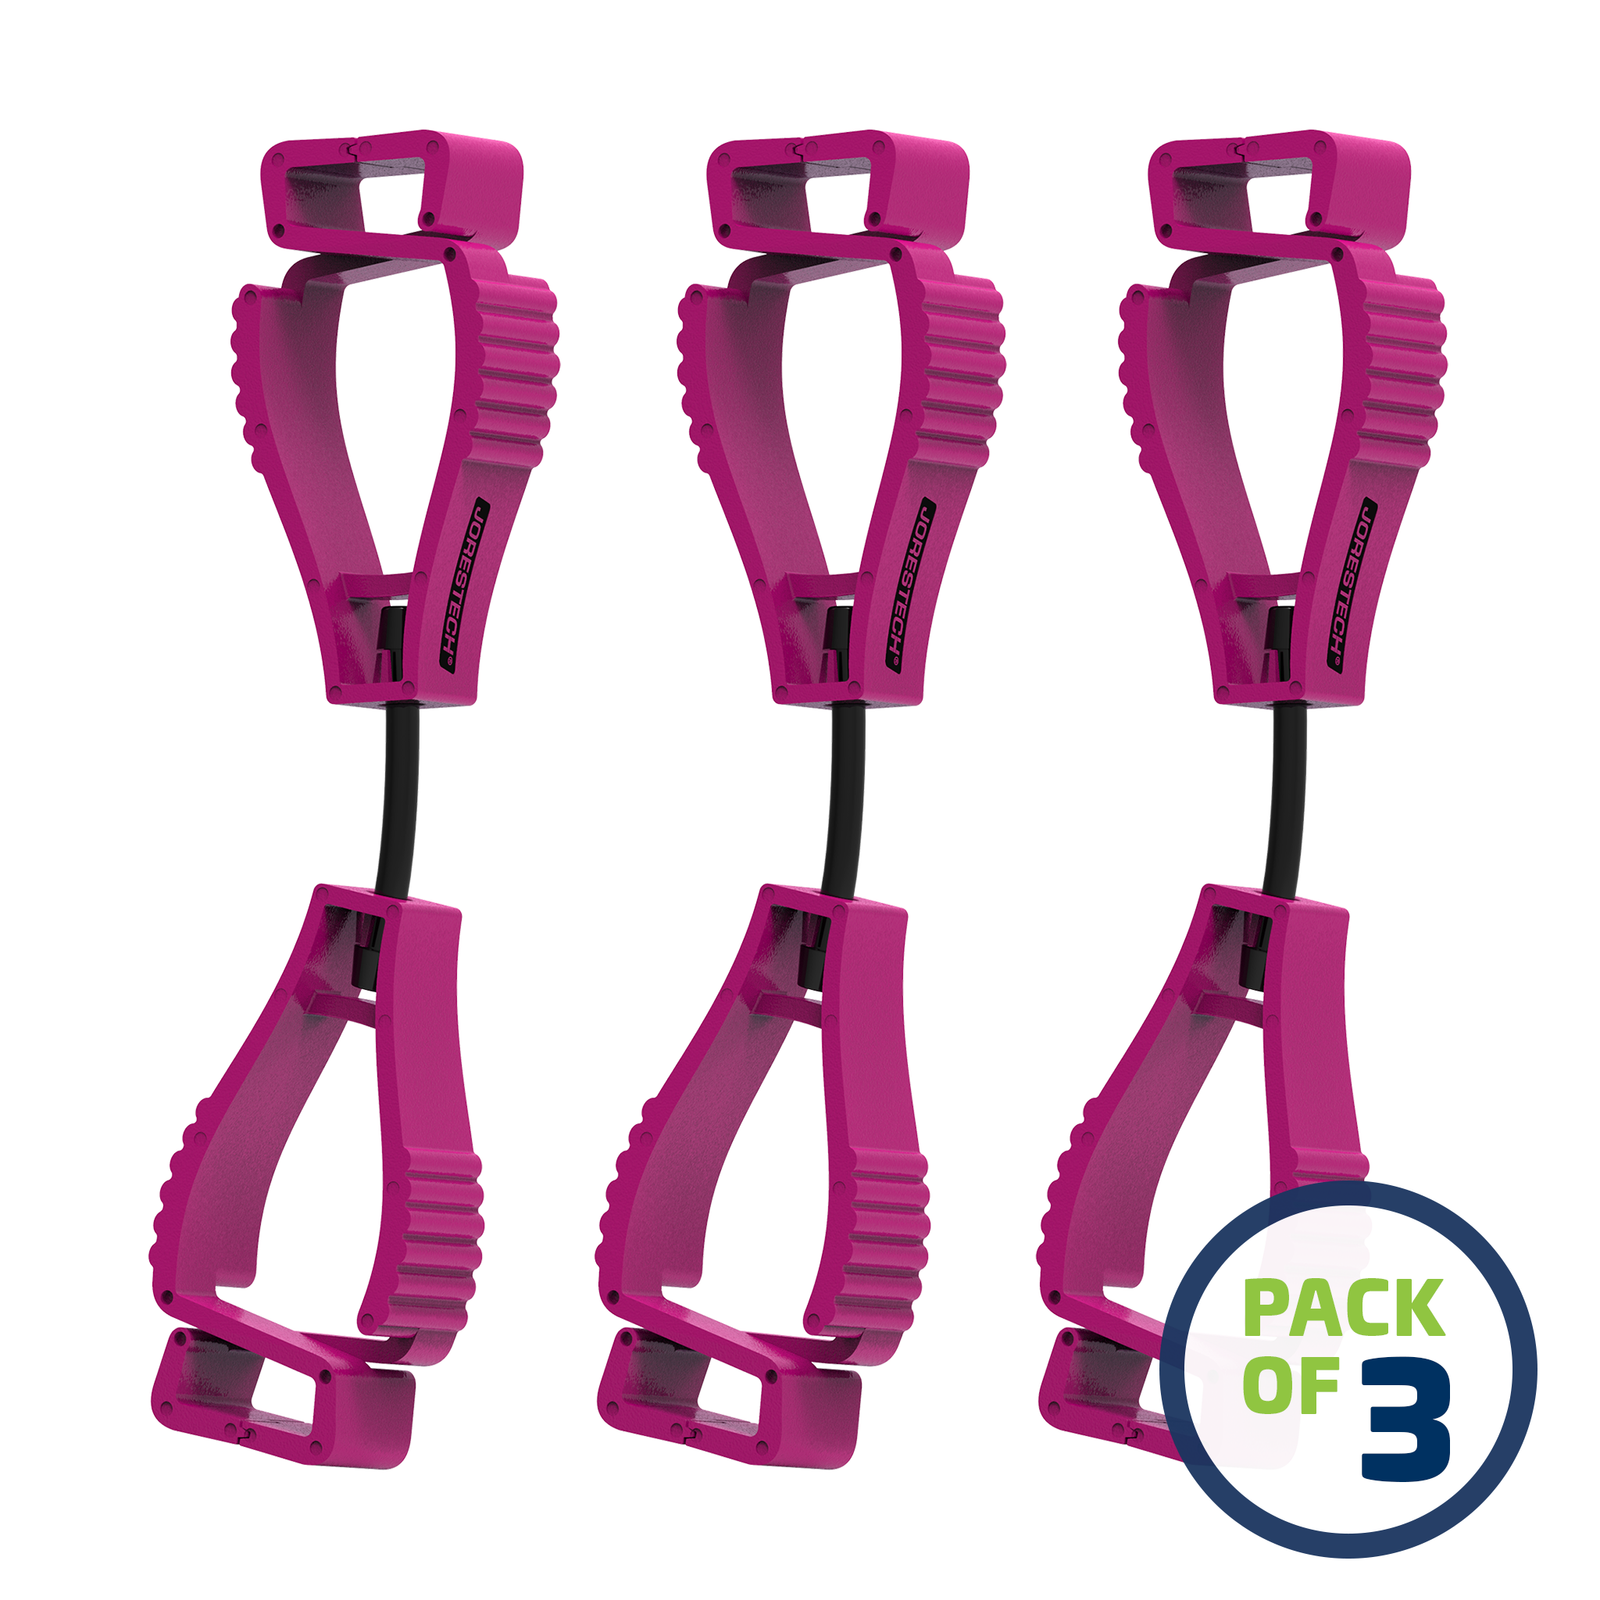 Set of 3 pink glove clip safety holders